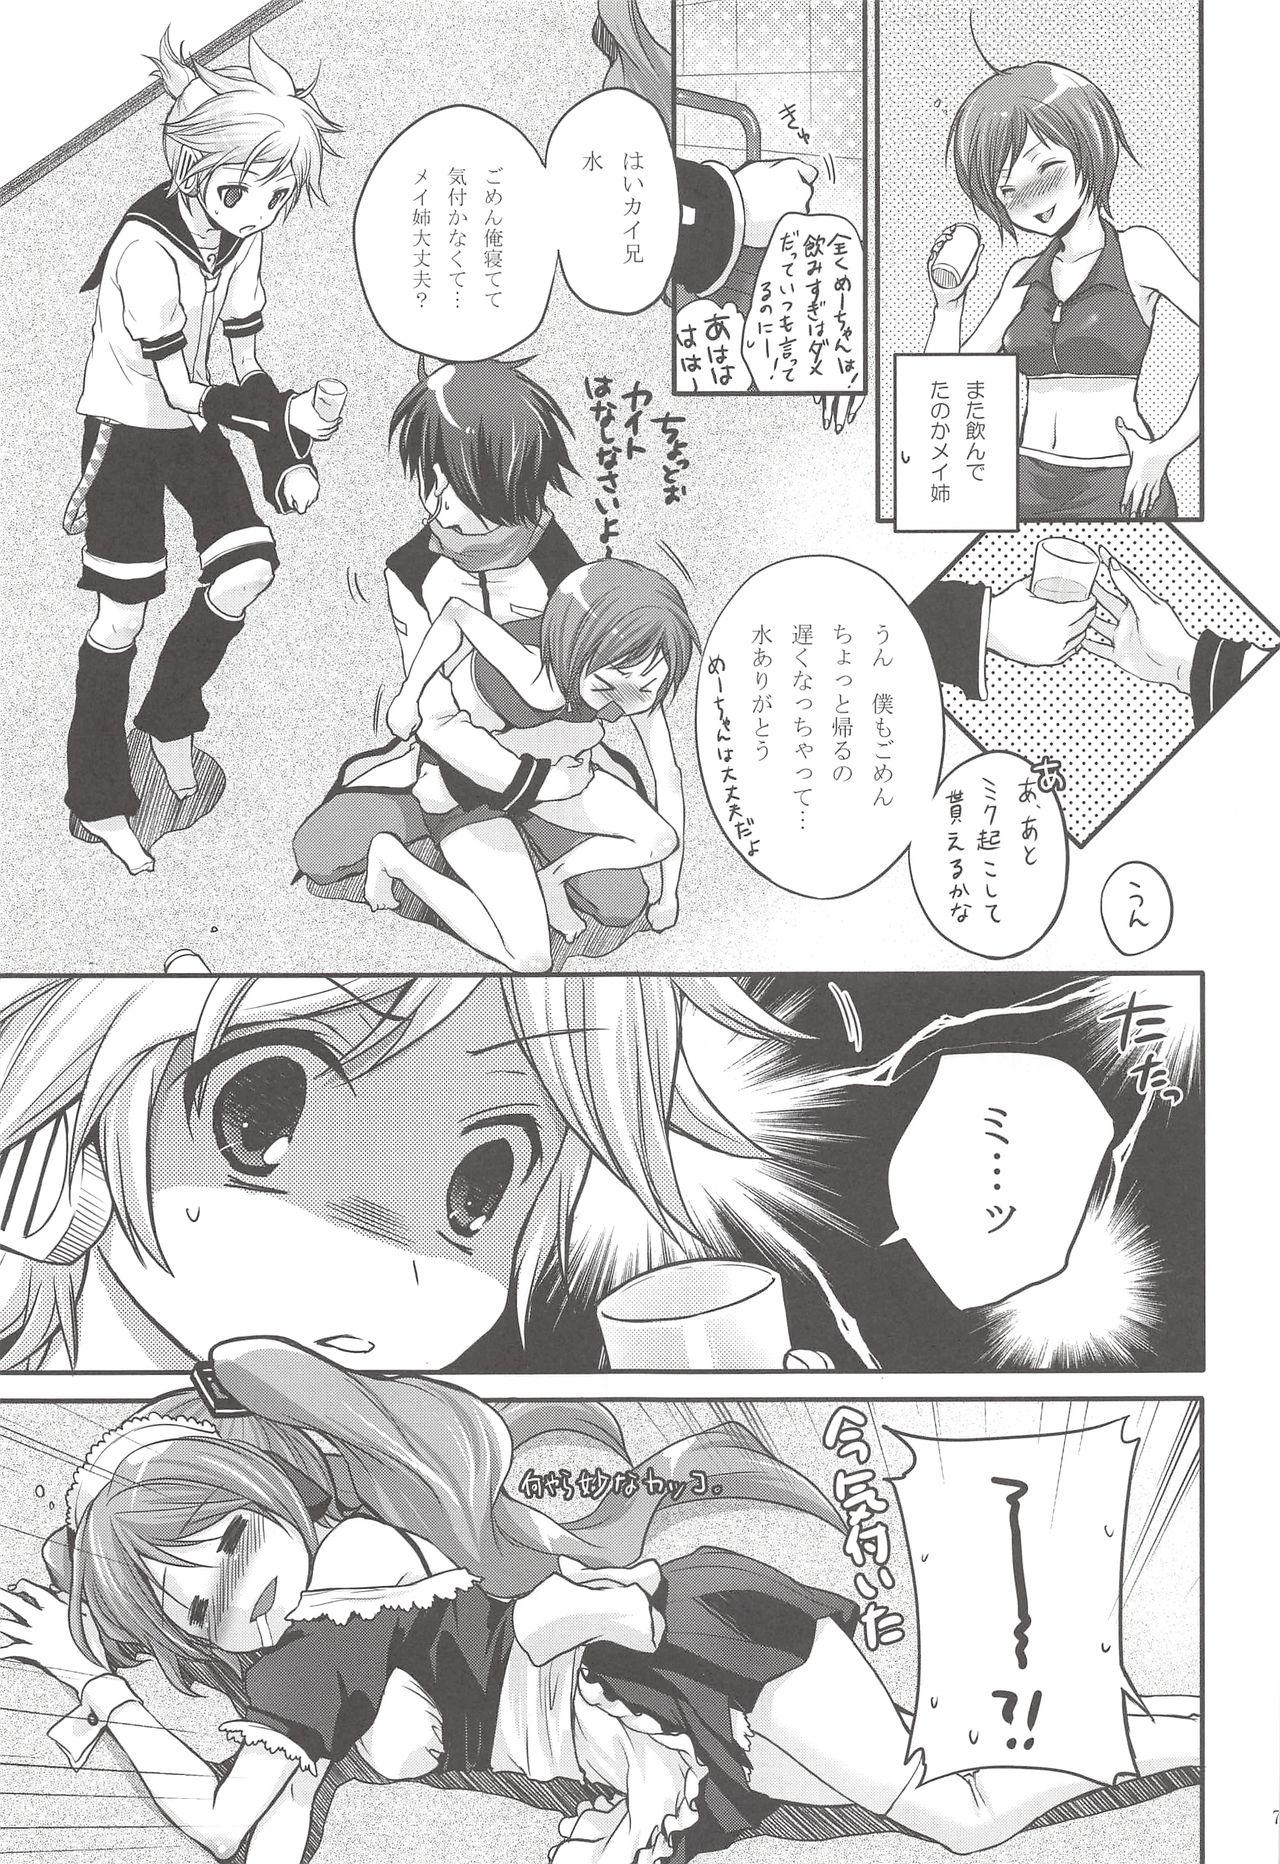 Cheerleader I serve domine - Vocaloid Hot Couple Sex - Page 6